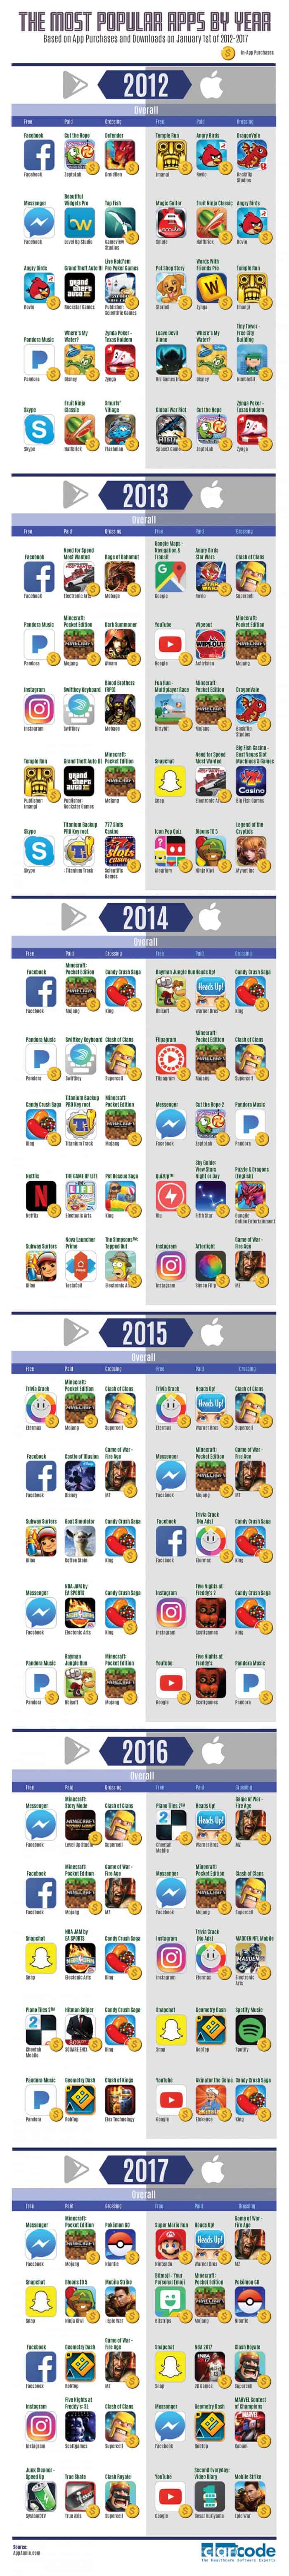 infographic describes the most popular smartphone apps from 2012 to 2017